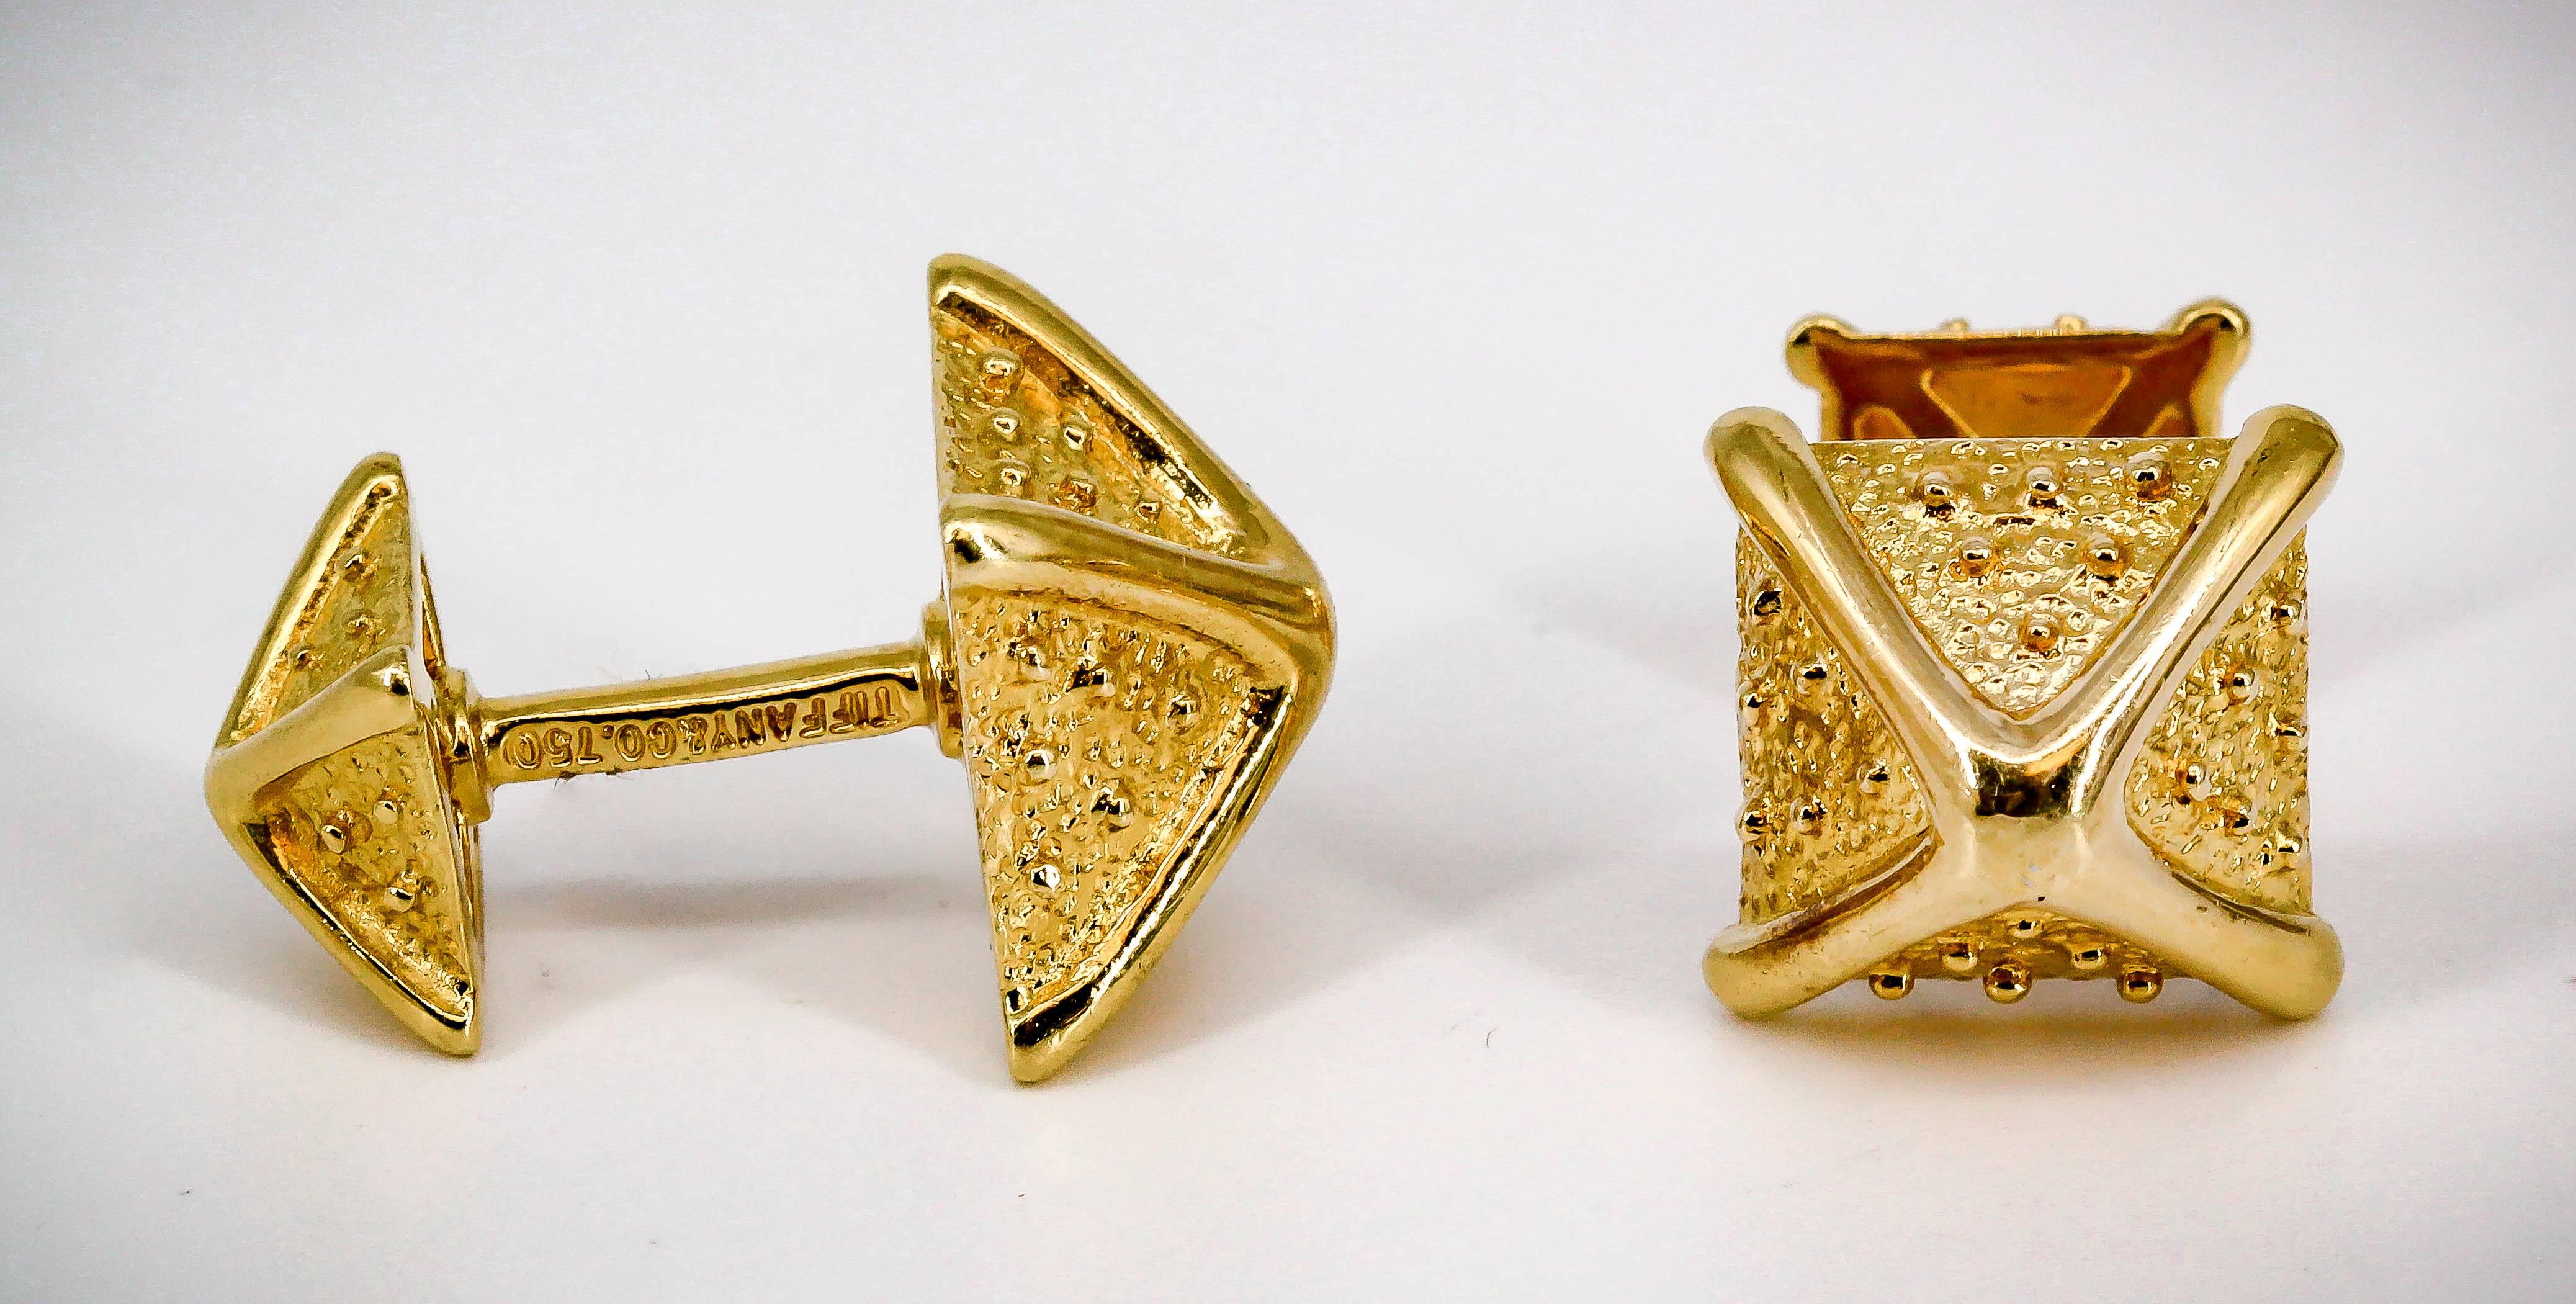 Handsome 18K yellow gold cufflinks by Tiffany & Co. Schlumberger. 

Hallmarks: Tiffany & Co. Schlumberger, 750.